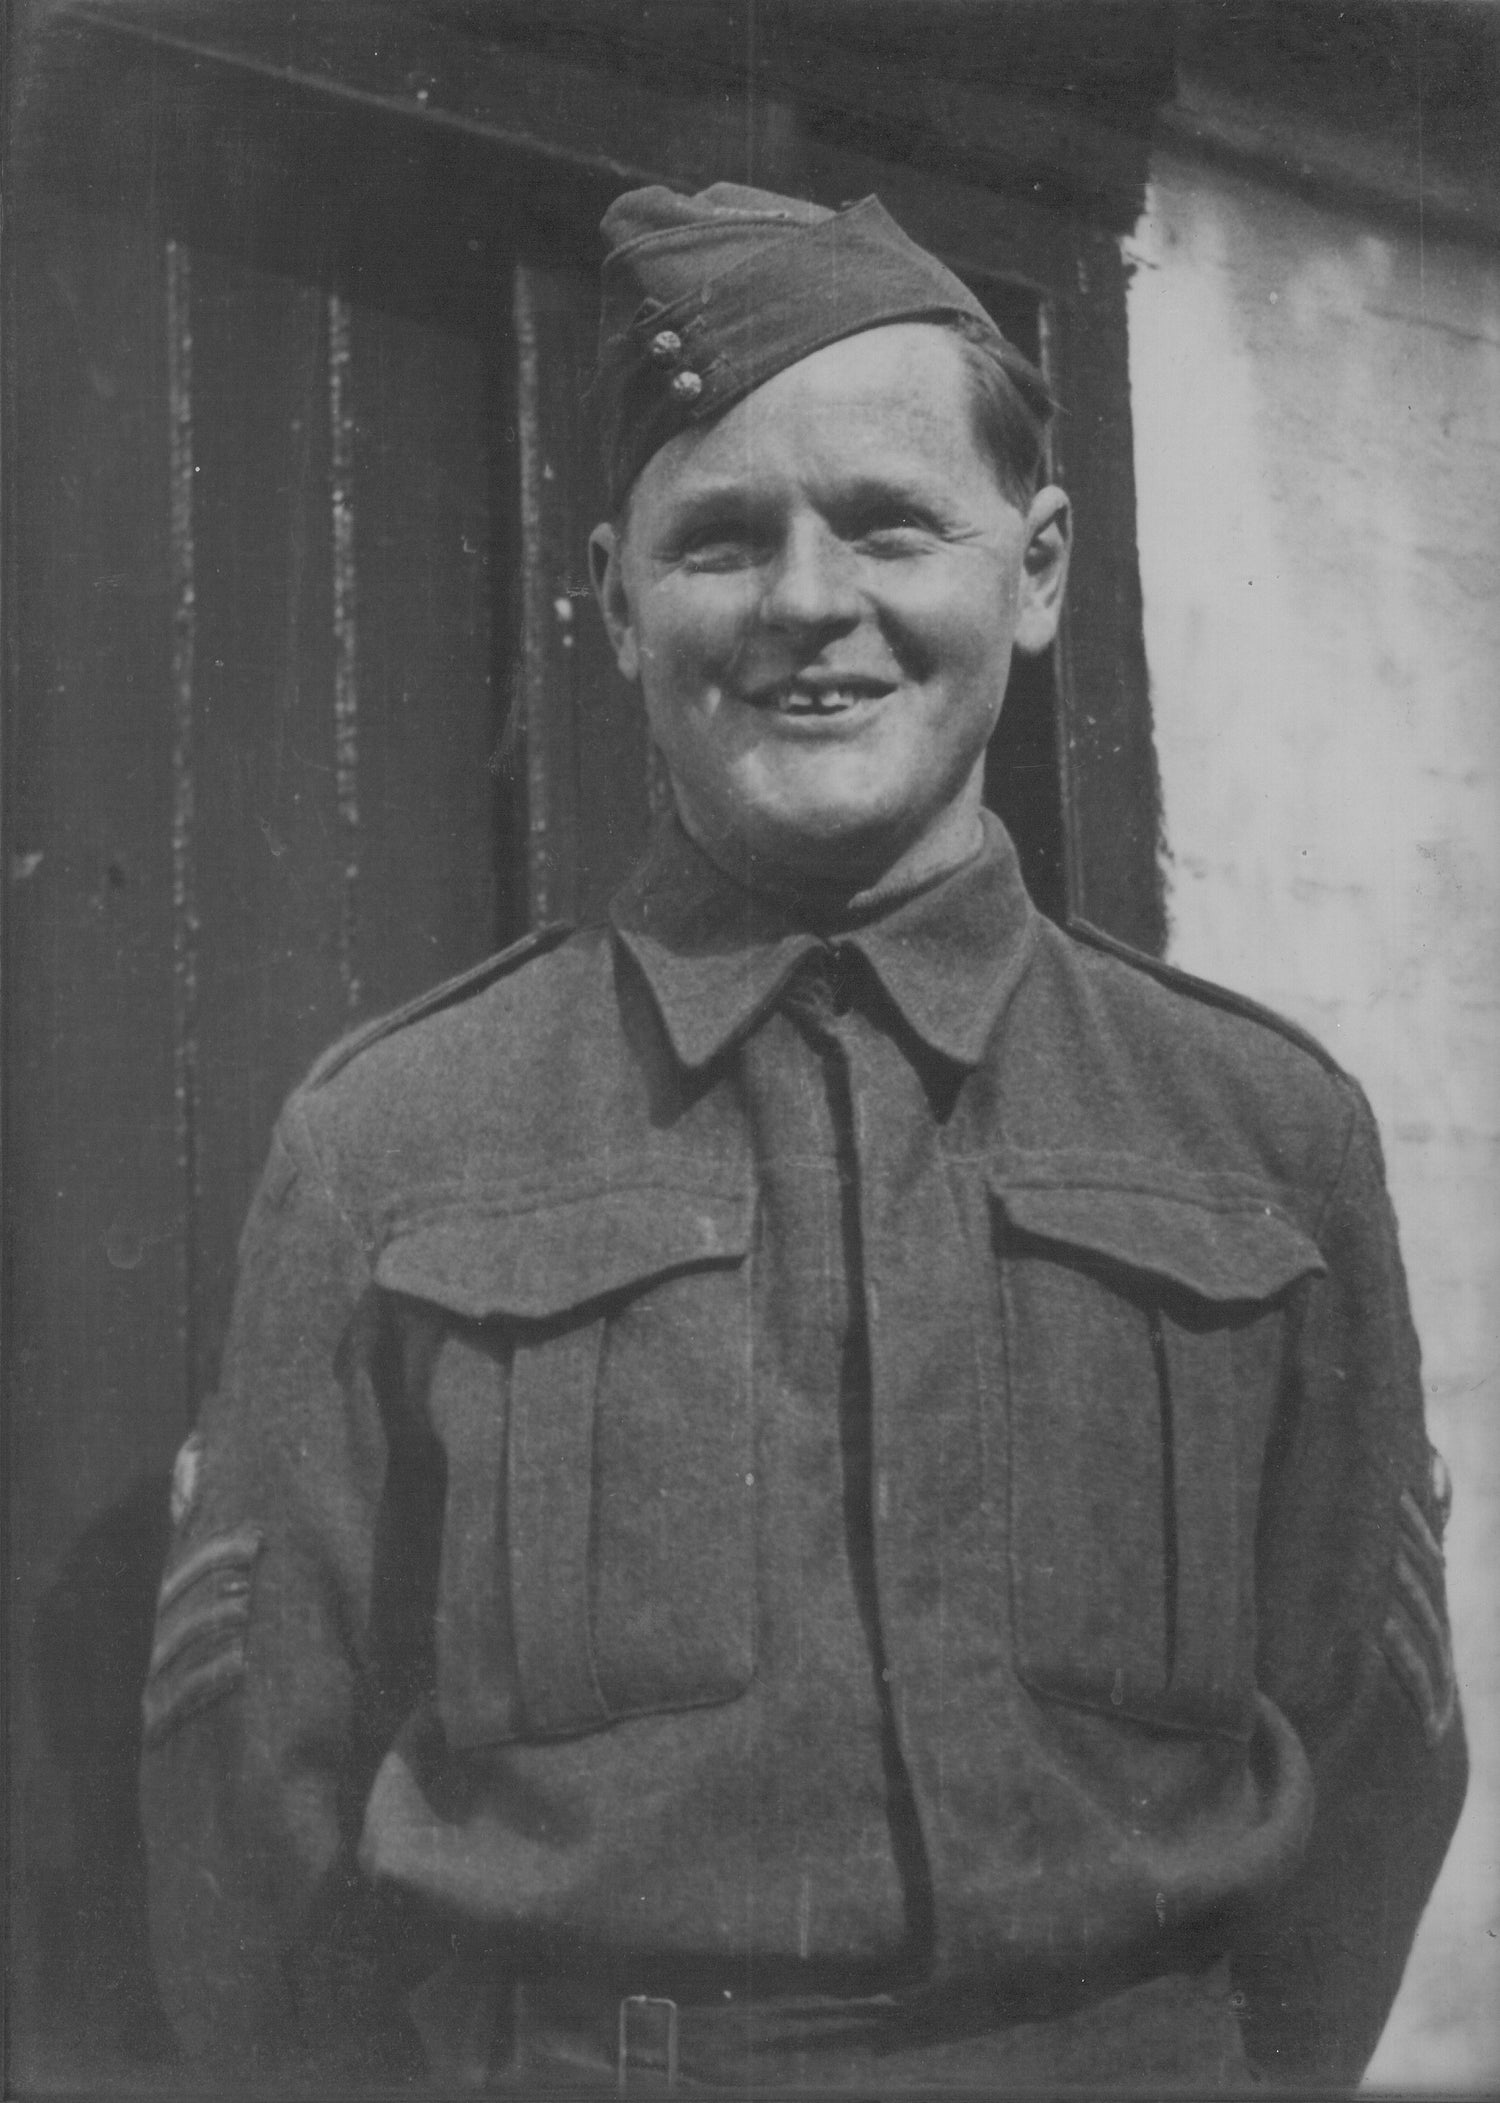 John Hamilton (Manager of the firm) in his home guard uniform during the second world war